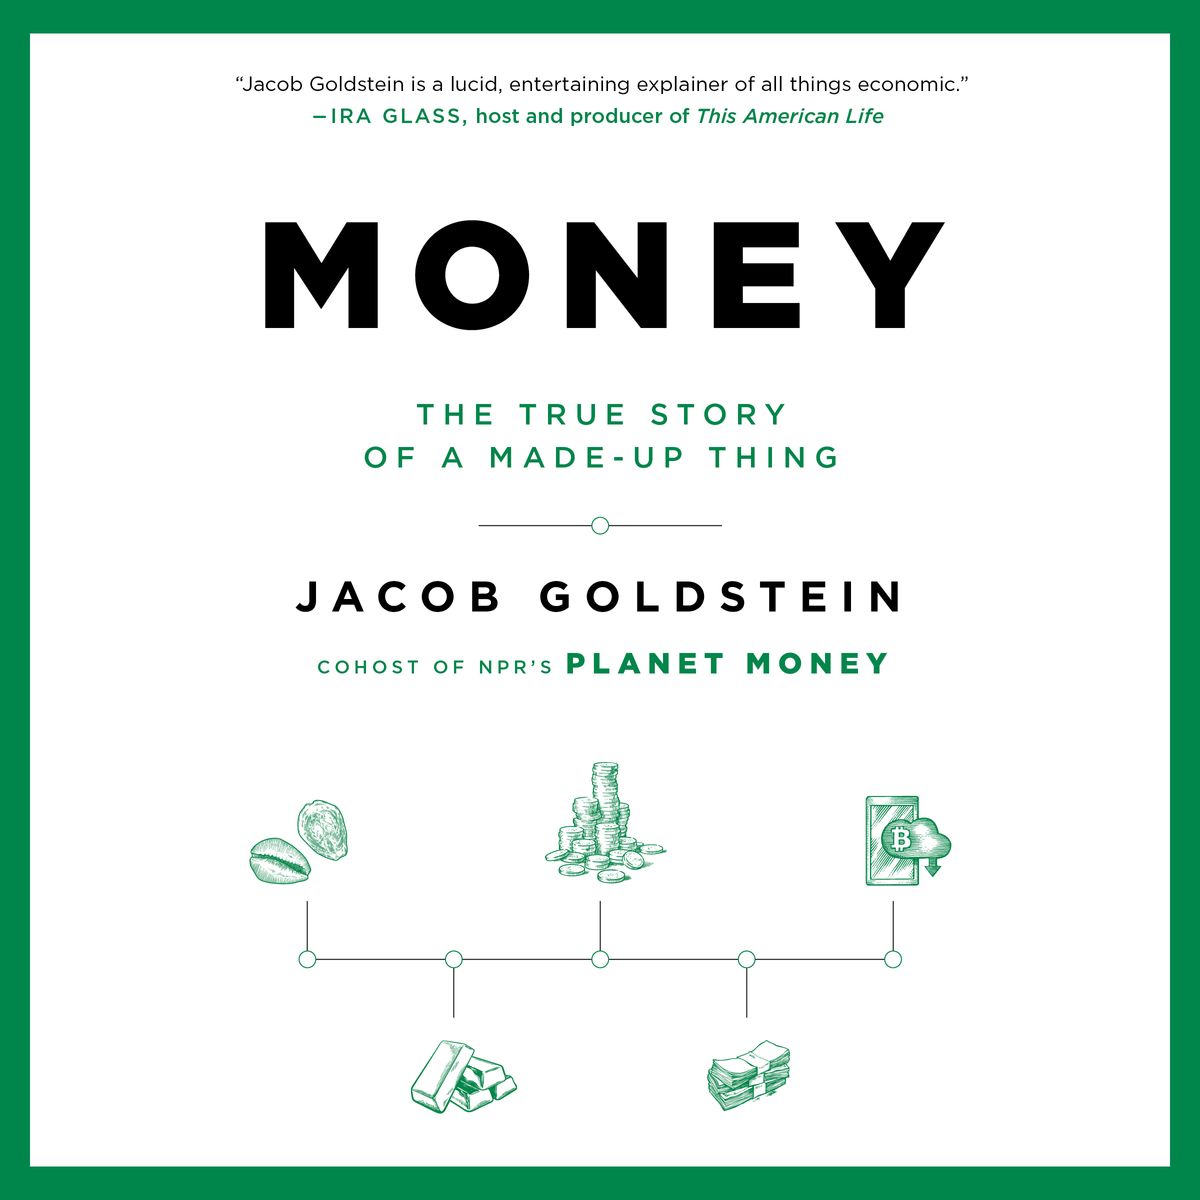 Cover image for Jacob Goldstein's book, 'Money: The True Story of a Made-Up Thing'